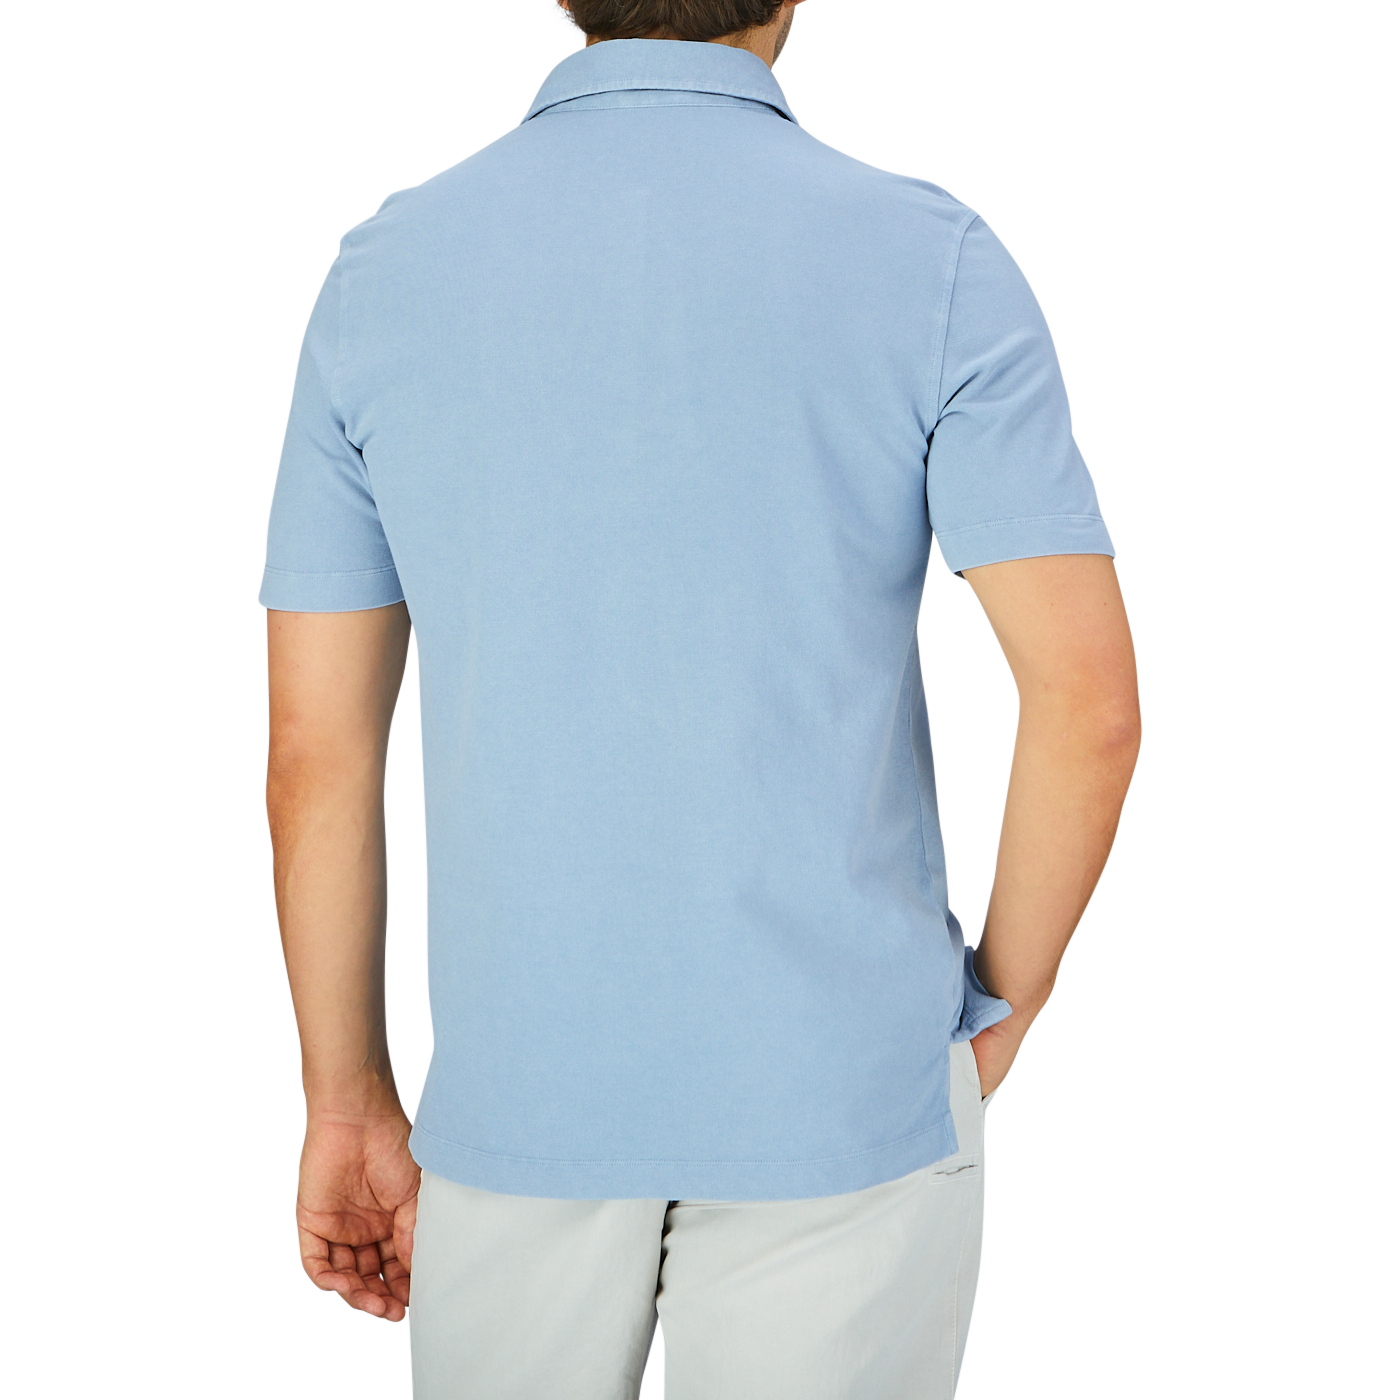 Rear view of a man wearing a light blue, short-sleeved Drumohr Sky Blue Cotton Piquet Polo Shirt and light-colored trousers against a plain background.